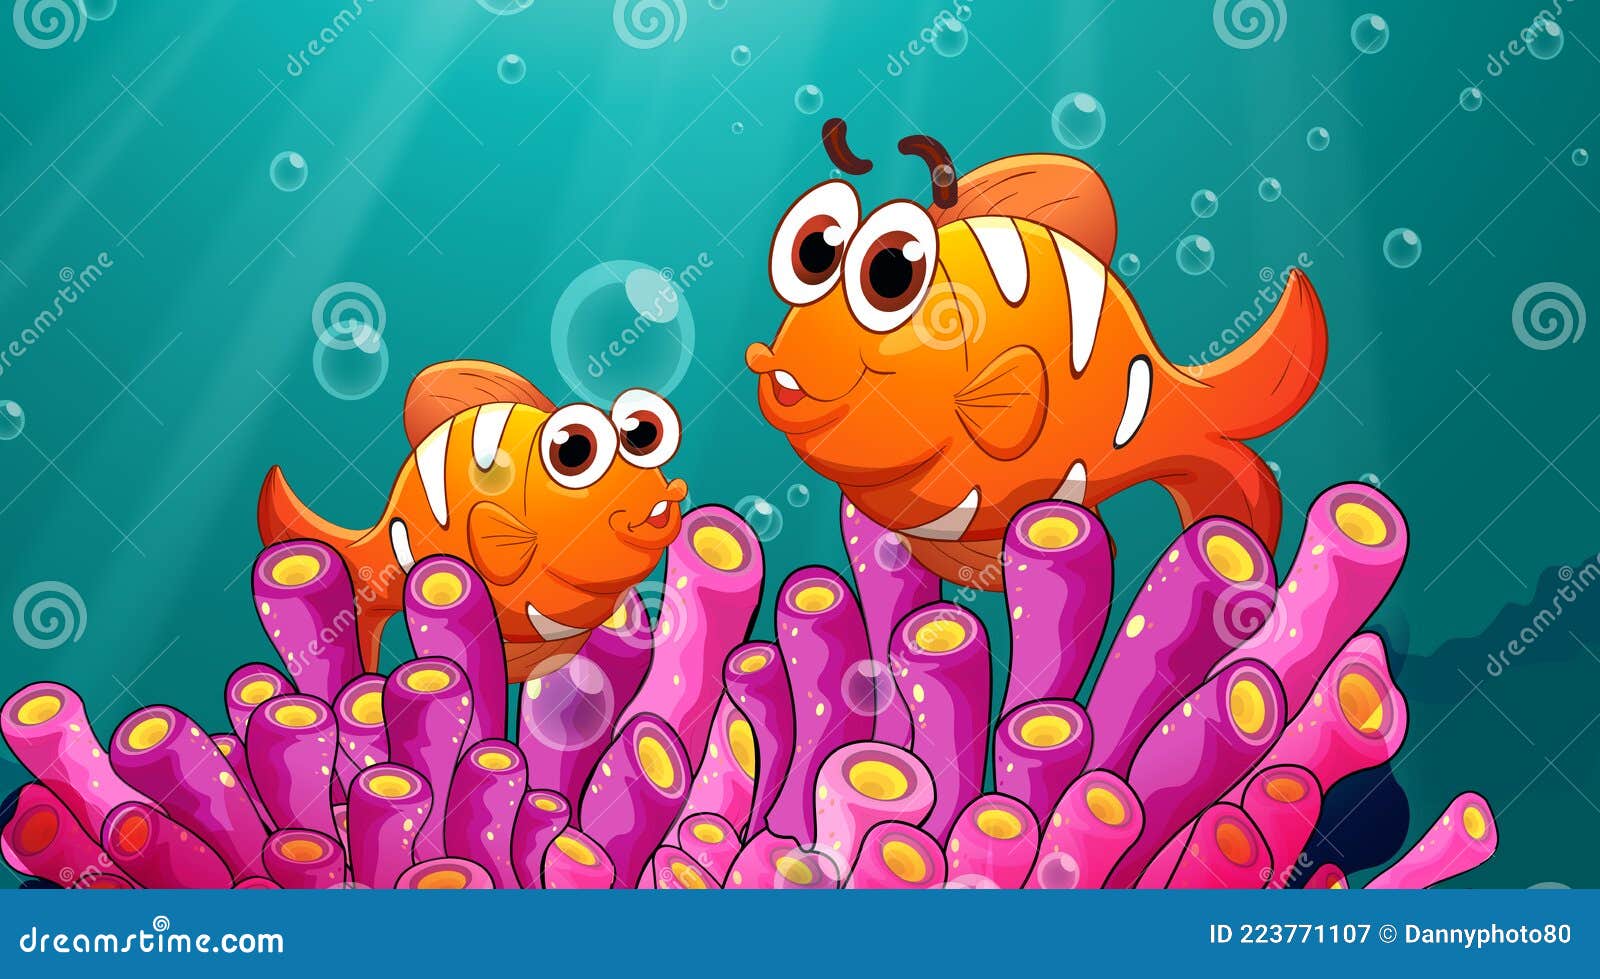 Underwater Scene with Clownfish Cartoon Character and Tropical Coral Reef  Stock Vector - Illustration of blank, nature: 223771107